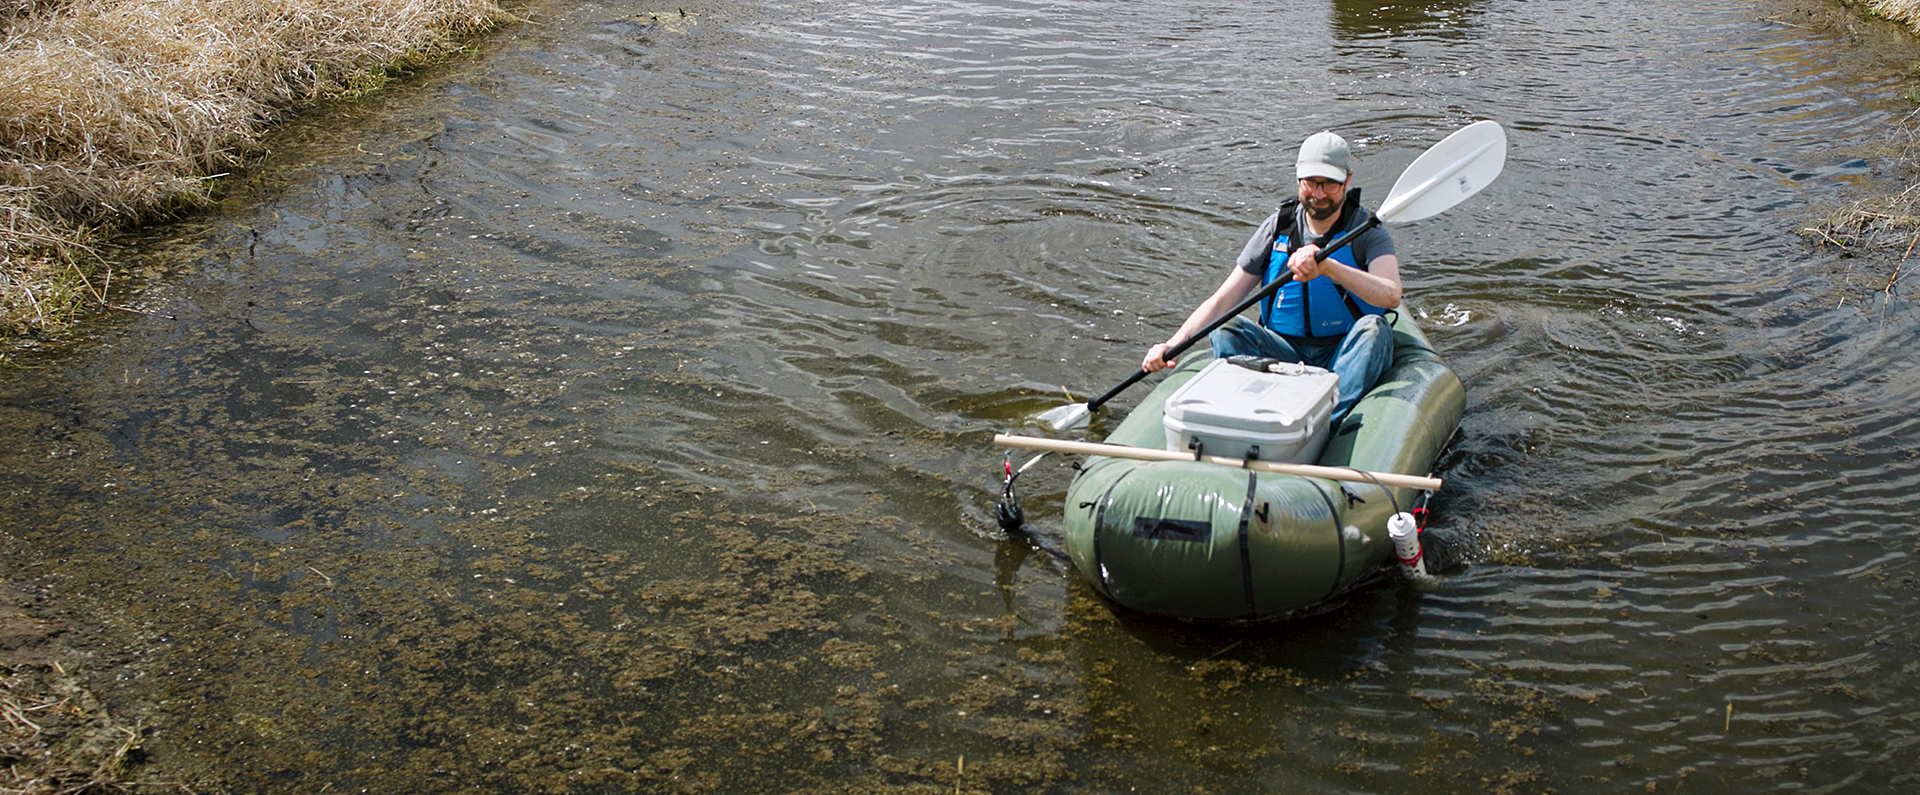 ARS researcher paddling in a stream.